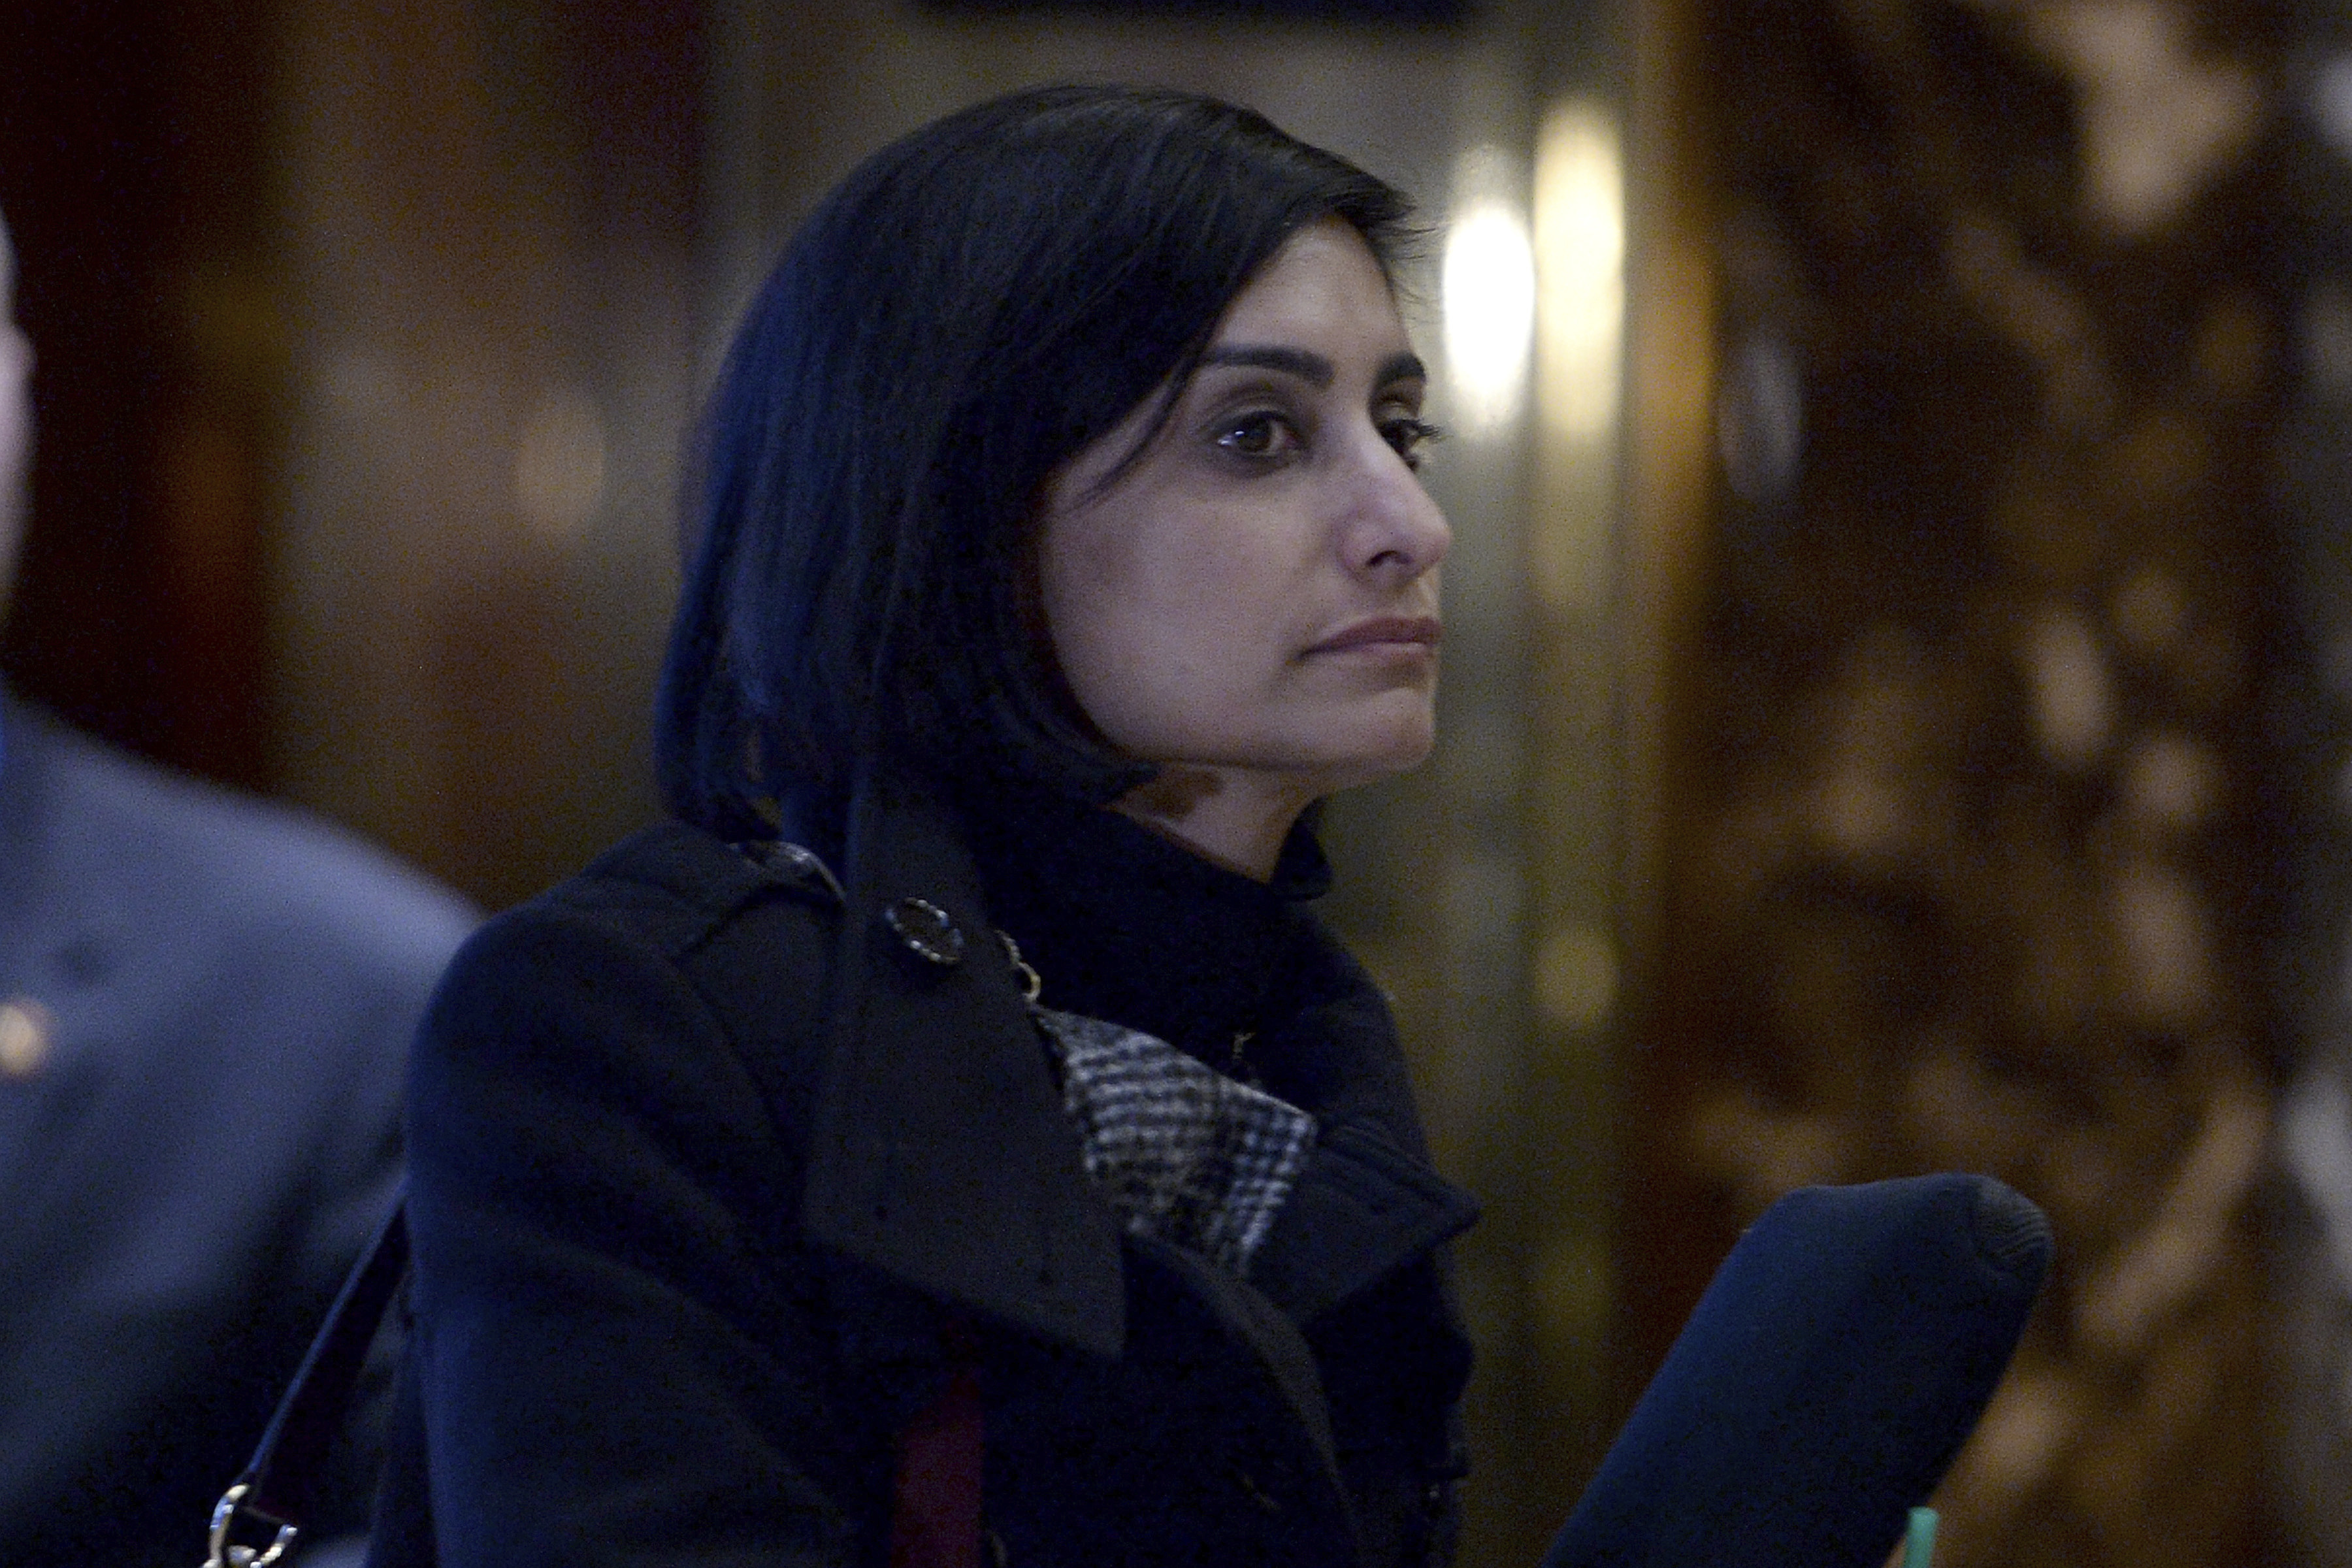 Seems Verma, president's choice for Centers for Medicare and Medicaid Services administrator, is seen waiting for the elevator in the lobby of the Trump Tower in New York on Jan. 10, 2017. (Anthony Beha—AP)